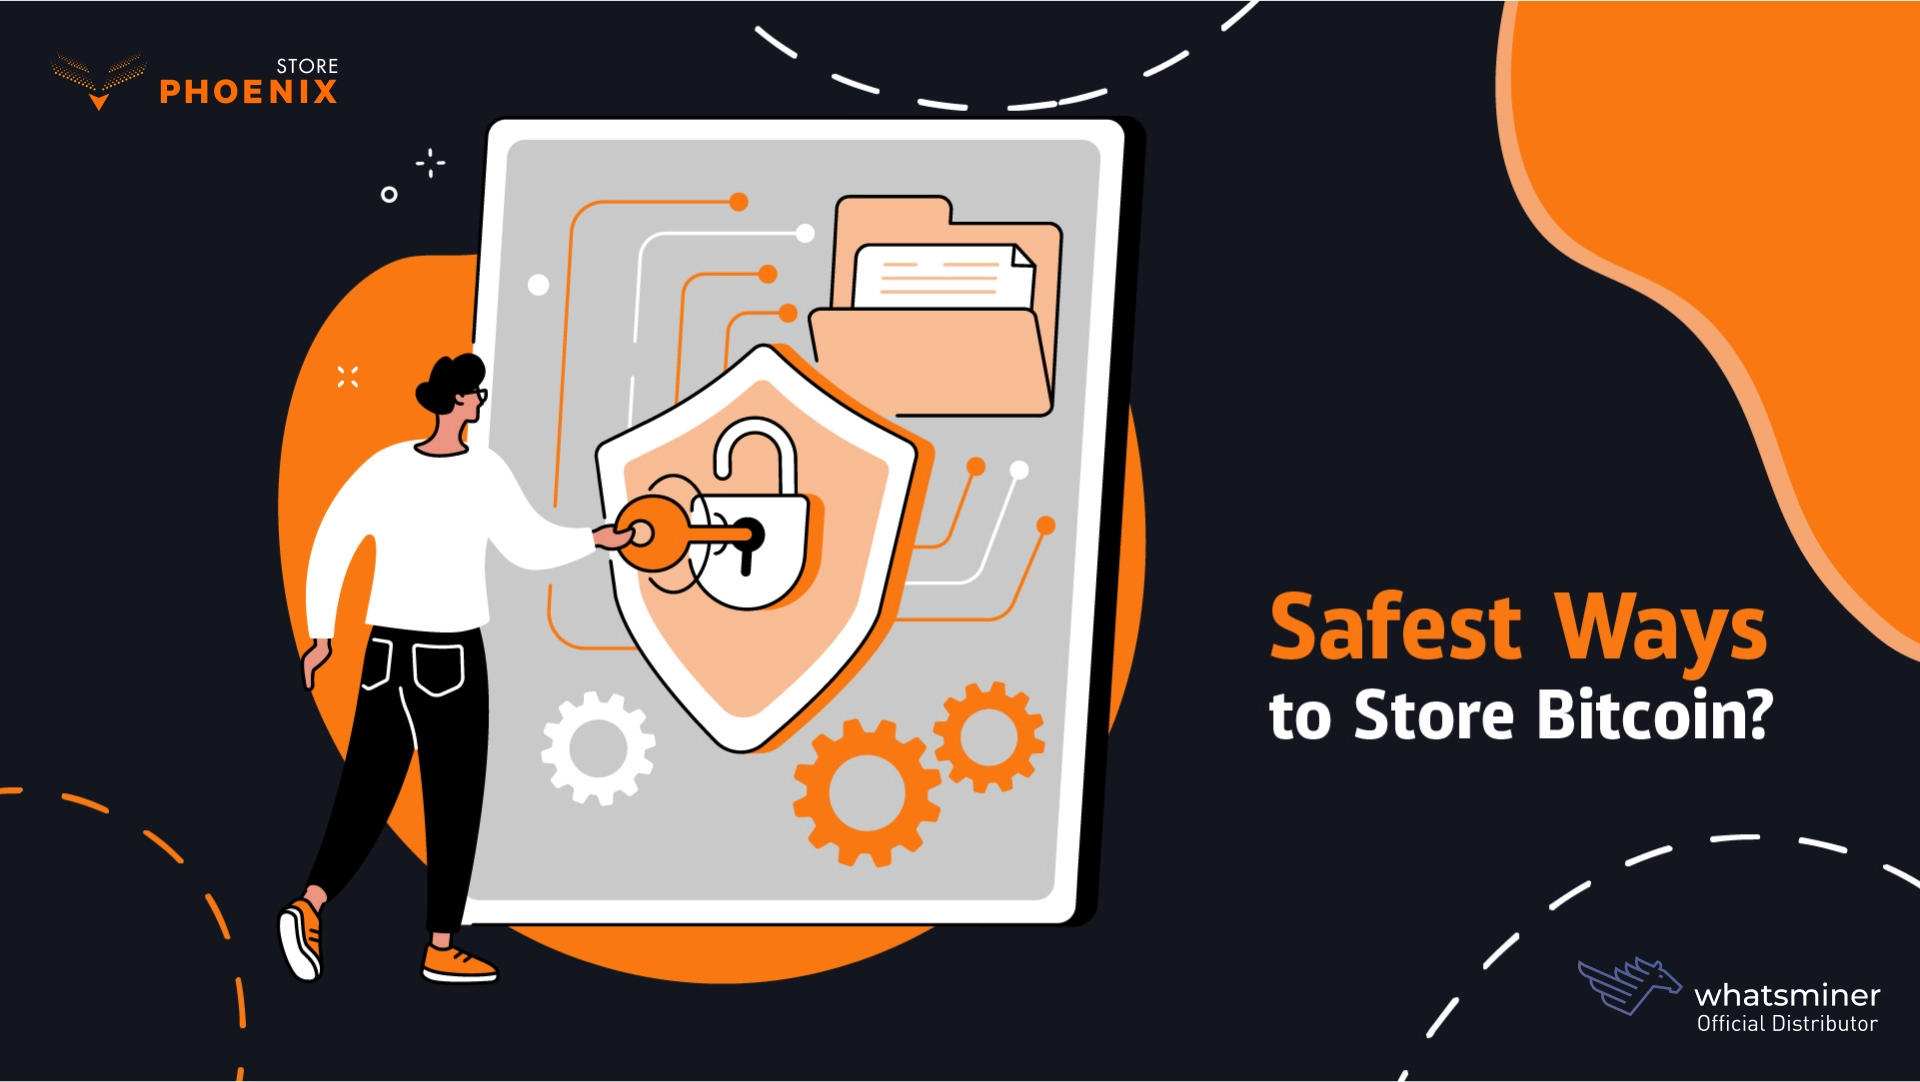 What are the Safest Ways to Store Bitcoin?